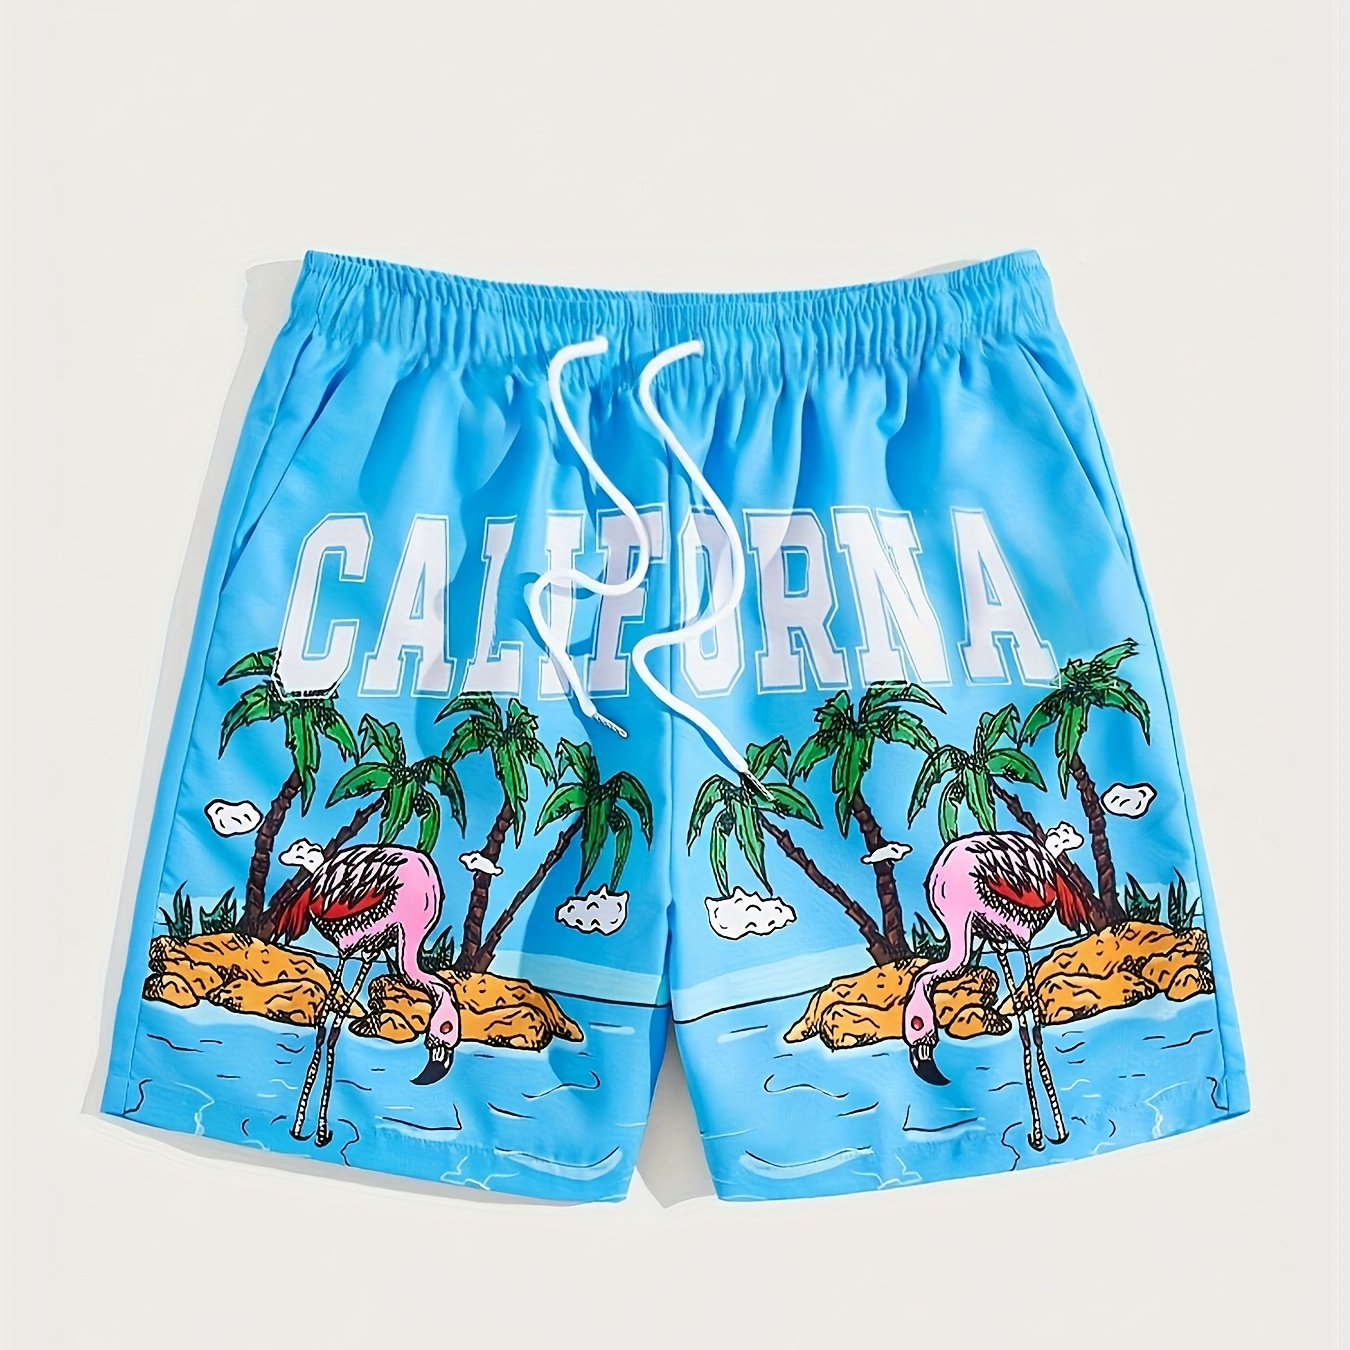 

Men's Trendy Hawaiian Graphic Shorts With Drawstring And Fancy Print For Summer Beach, Pool And Resort